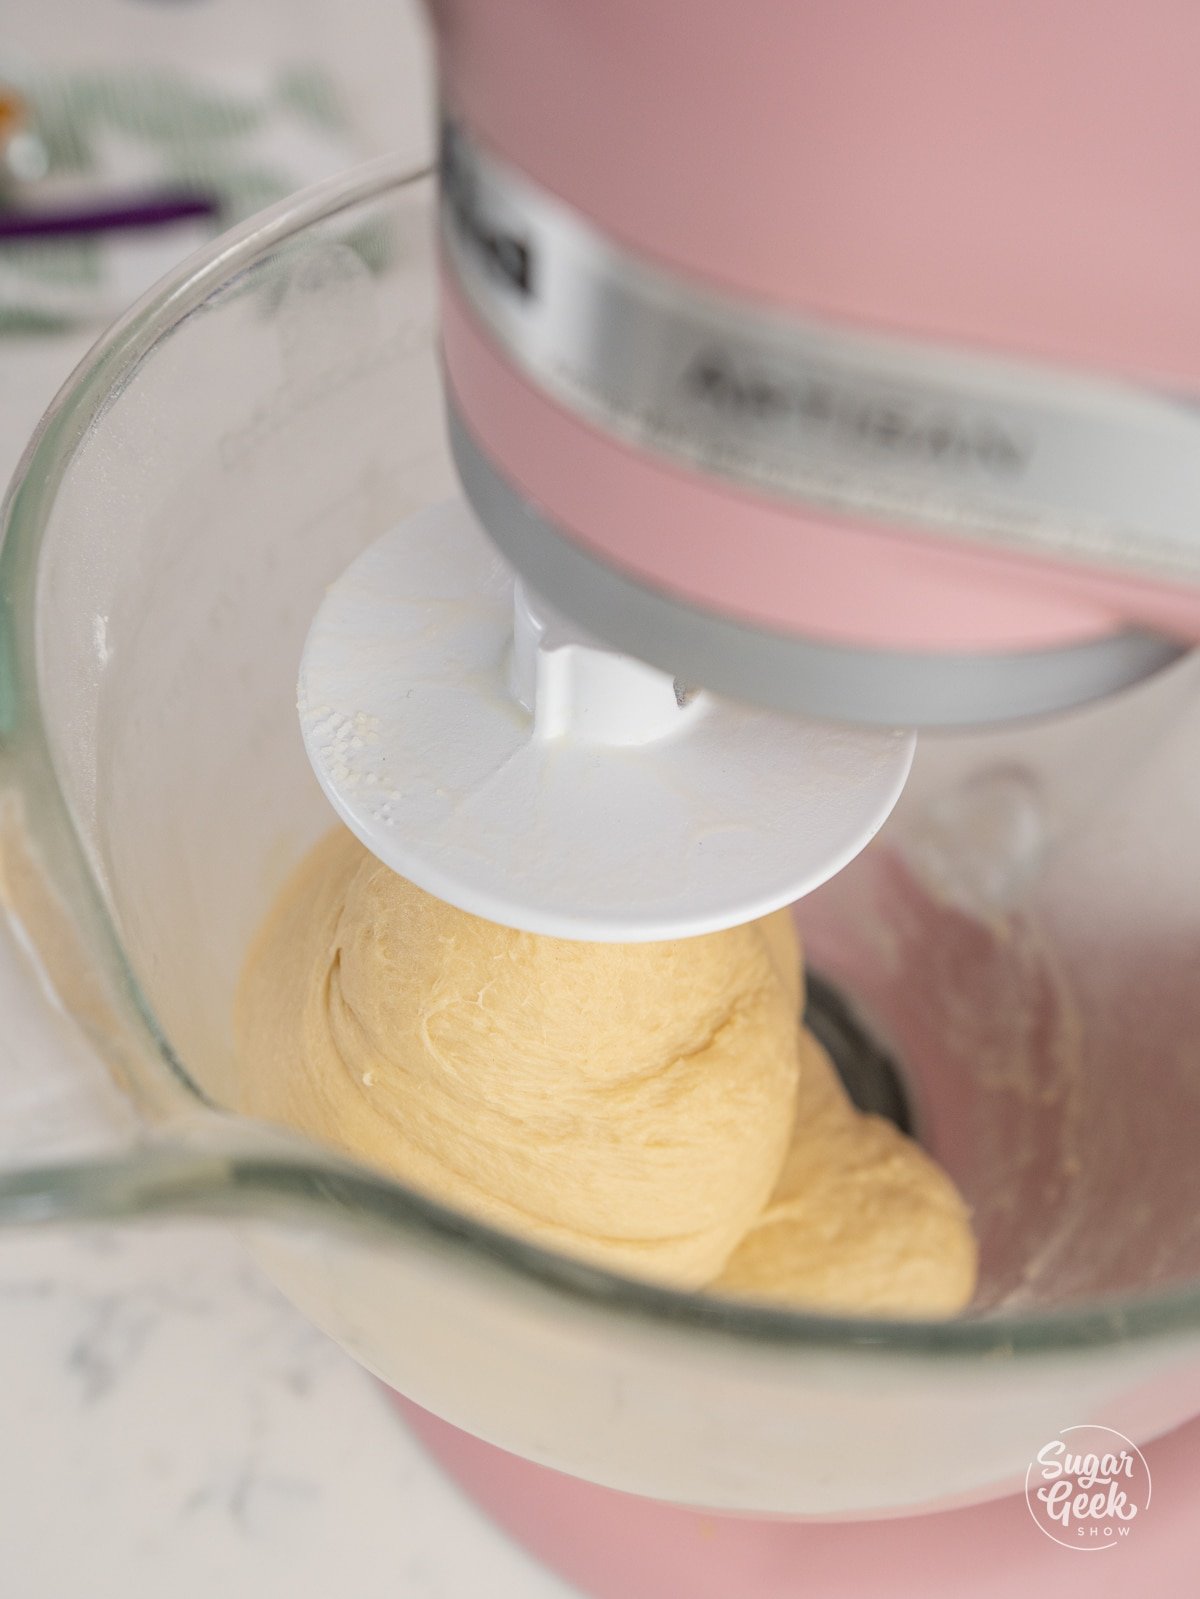 dough mixing in a glass stand mixer bowl